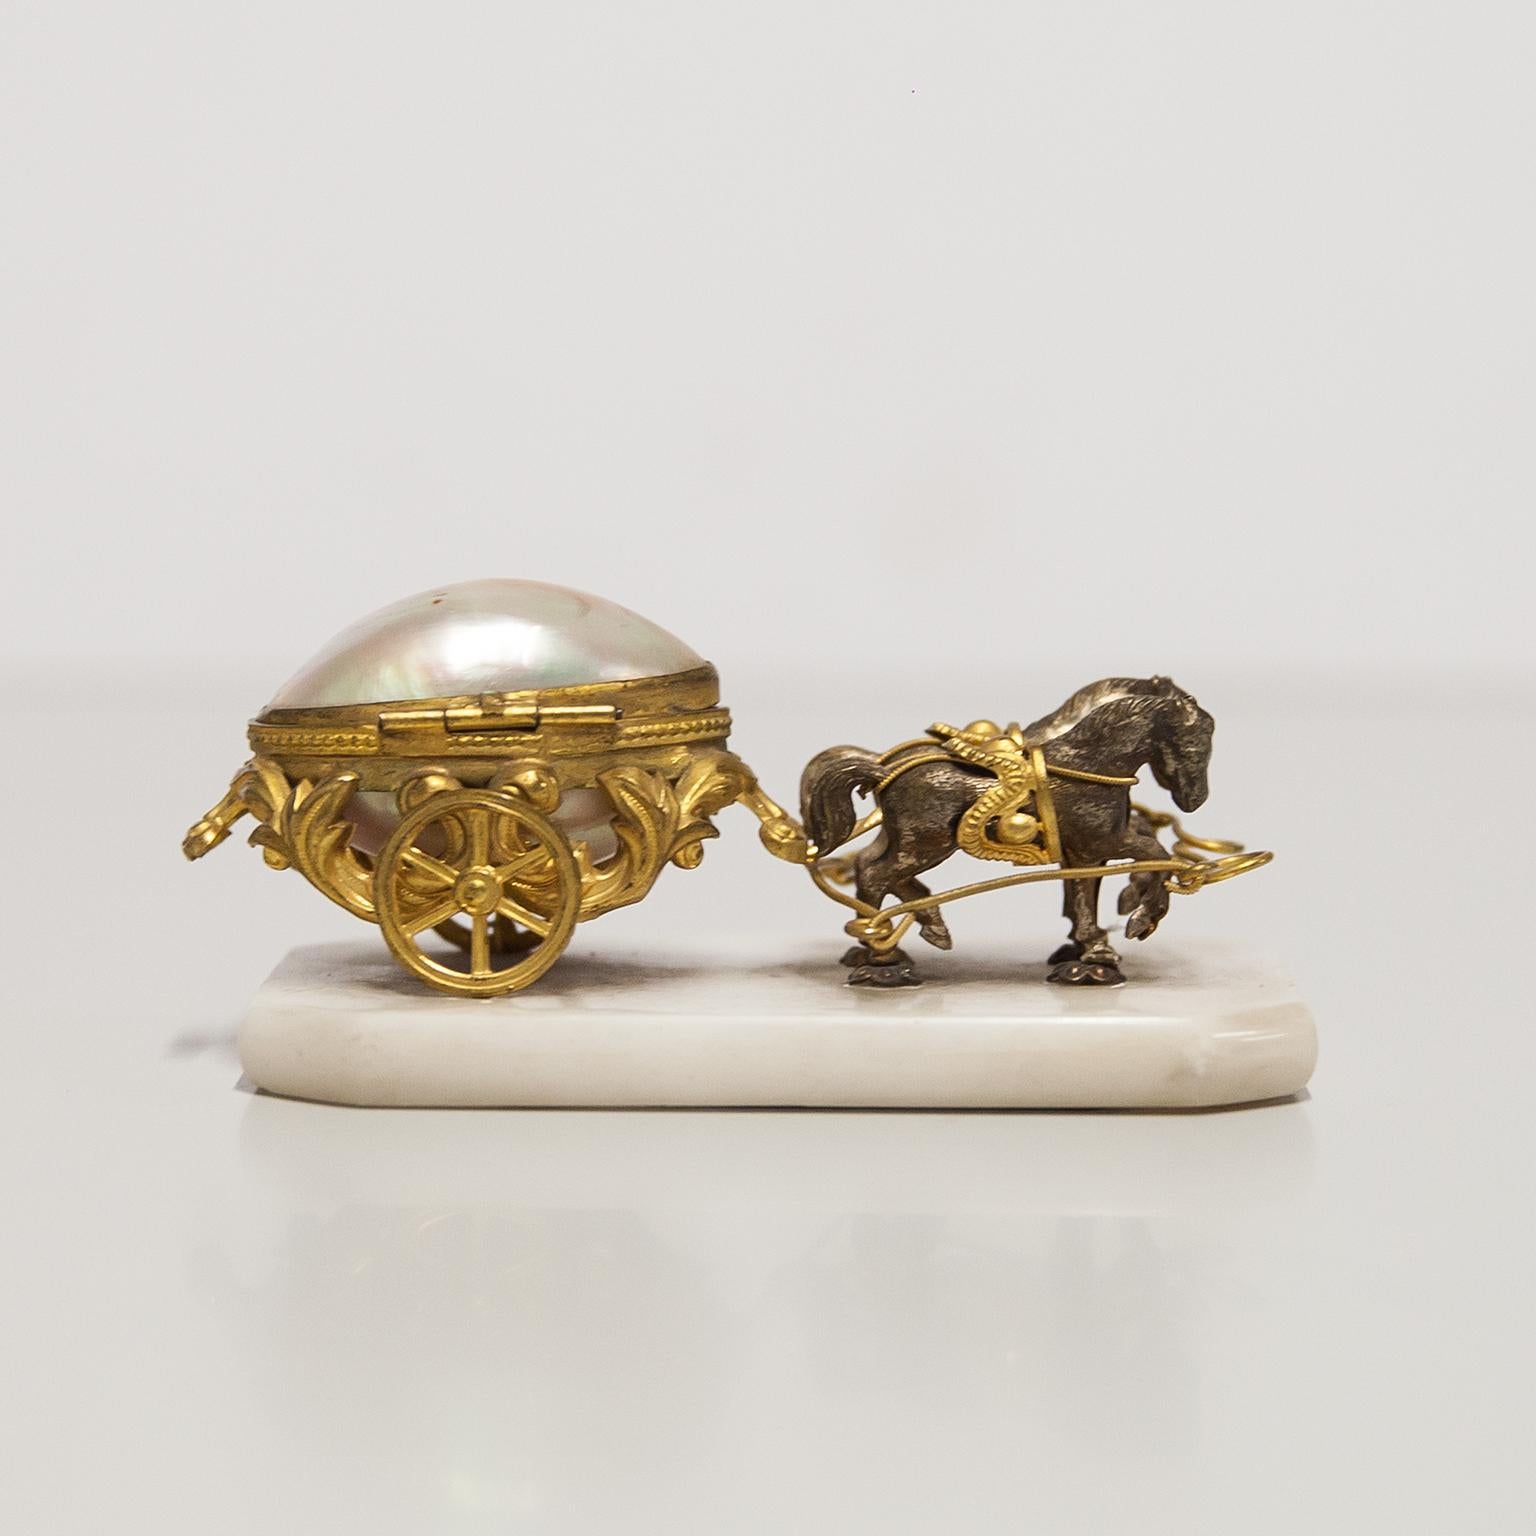 A ‘Palais Royal’ miniature horse-drawn carriage trinket box made with mother of pearl, silver-plated horses and gold plated metal. 19th century.
